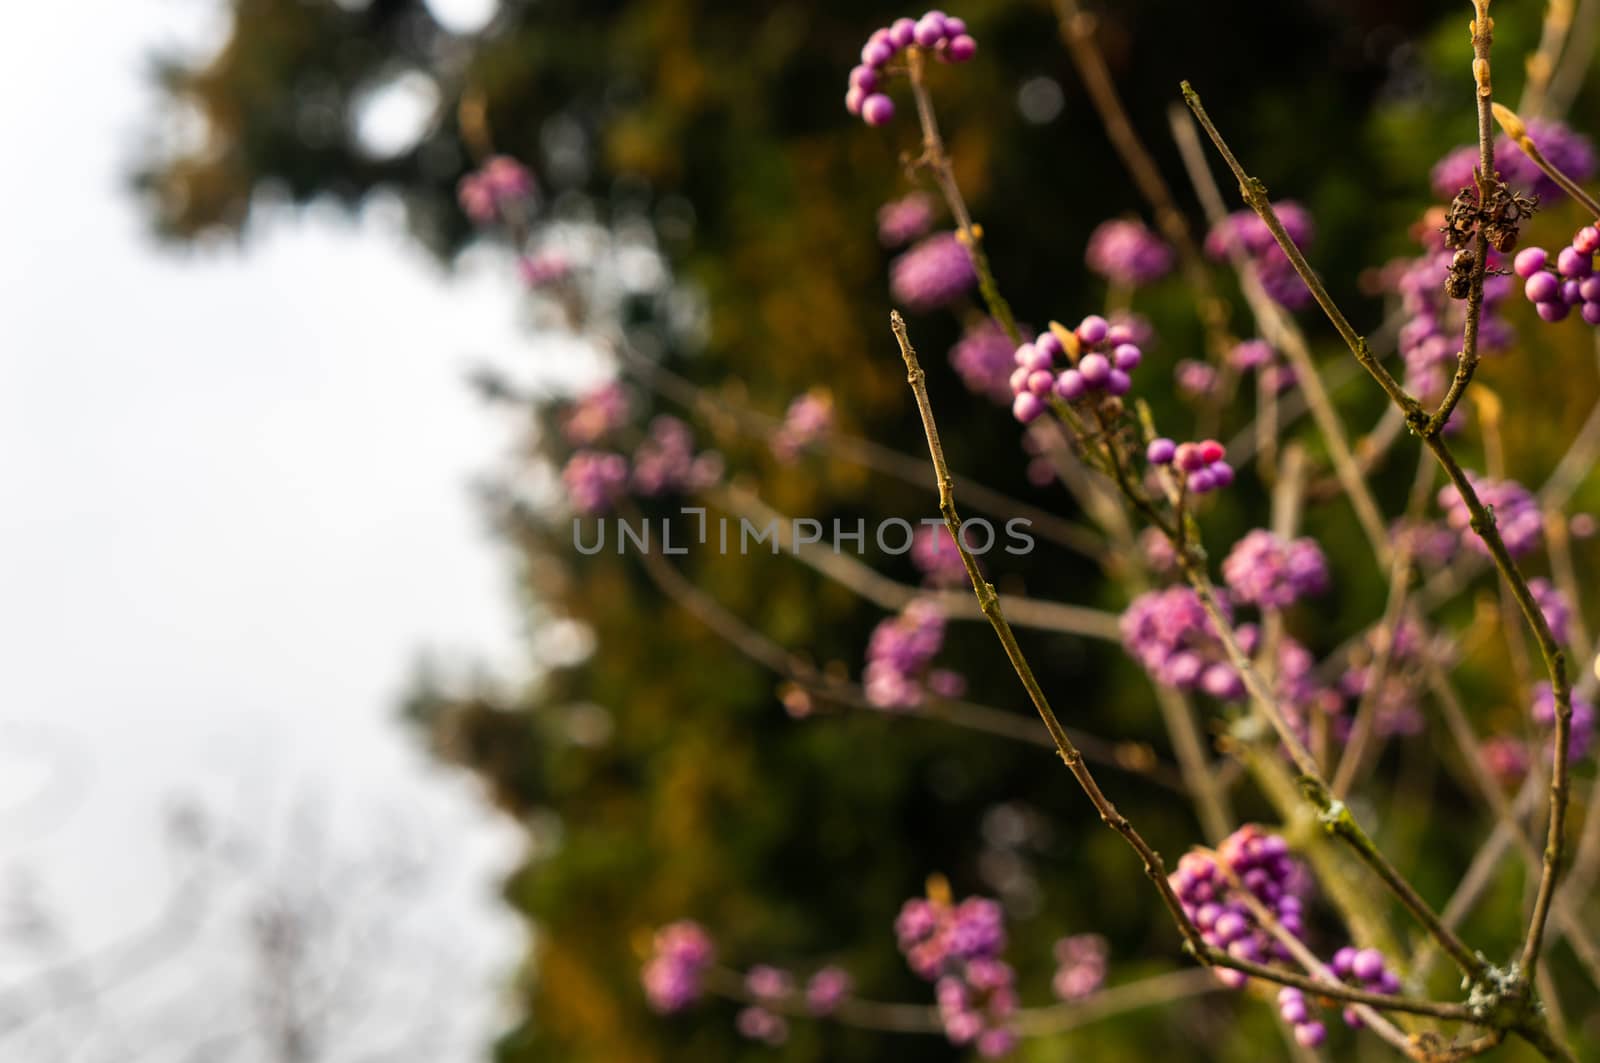 BOTANICAL GARDENS, TROJA, PRAGUE: Purple Japanese beauty berries growing in clusters out of focus with barren twigs in the foreground. Blurred background with soft warm light and plants growing towrds the sun.